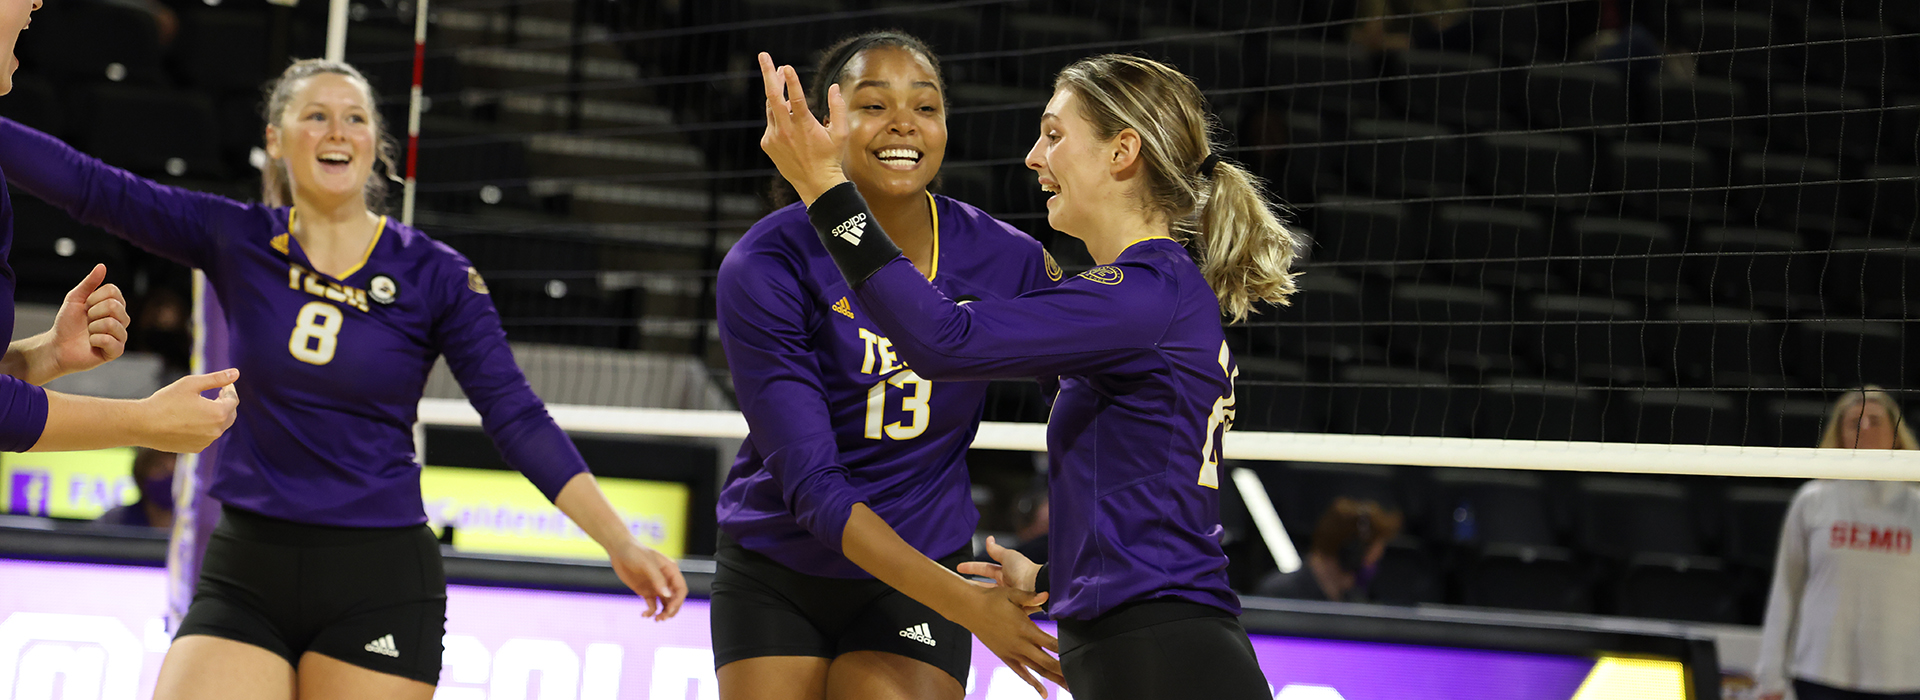 Purple and gold deliver remarkable comeback in 3-2 win over UT Martin